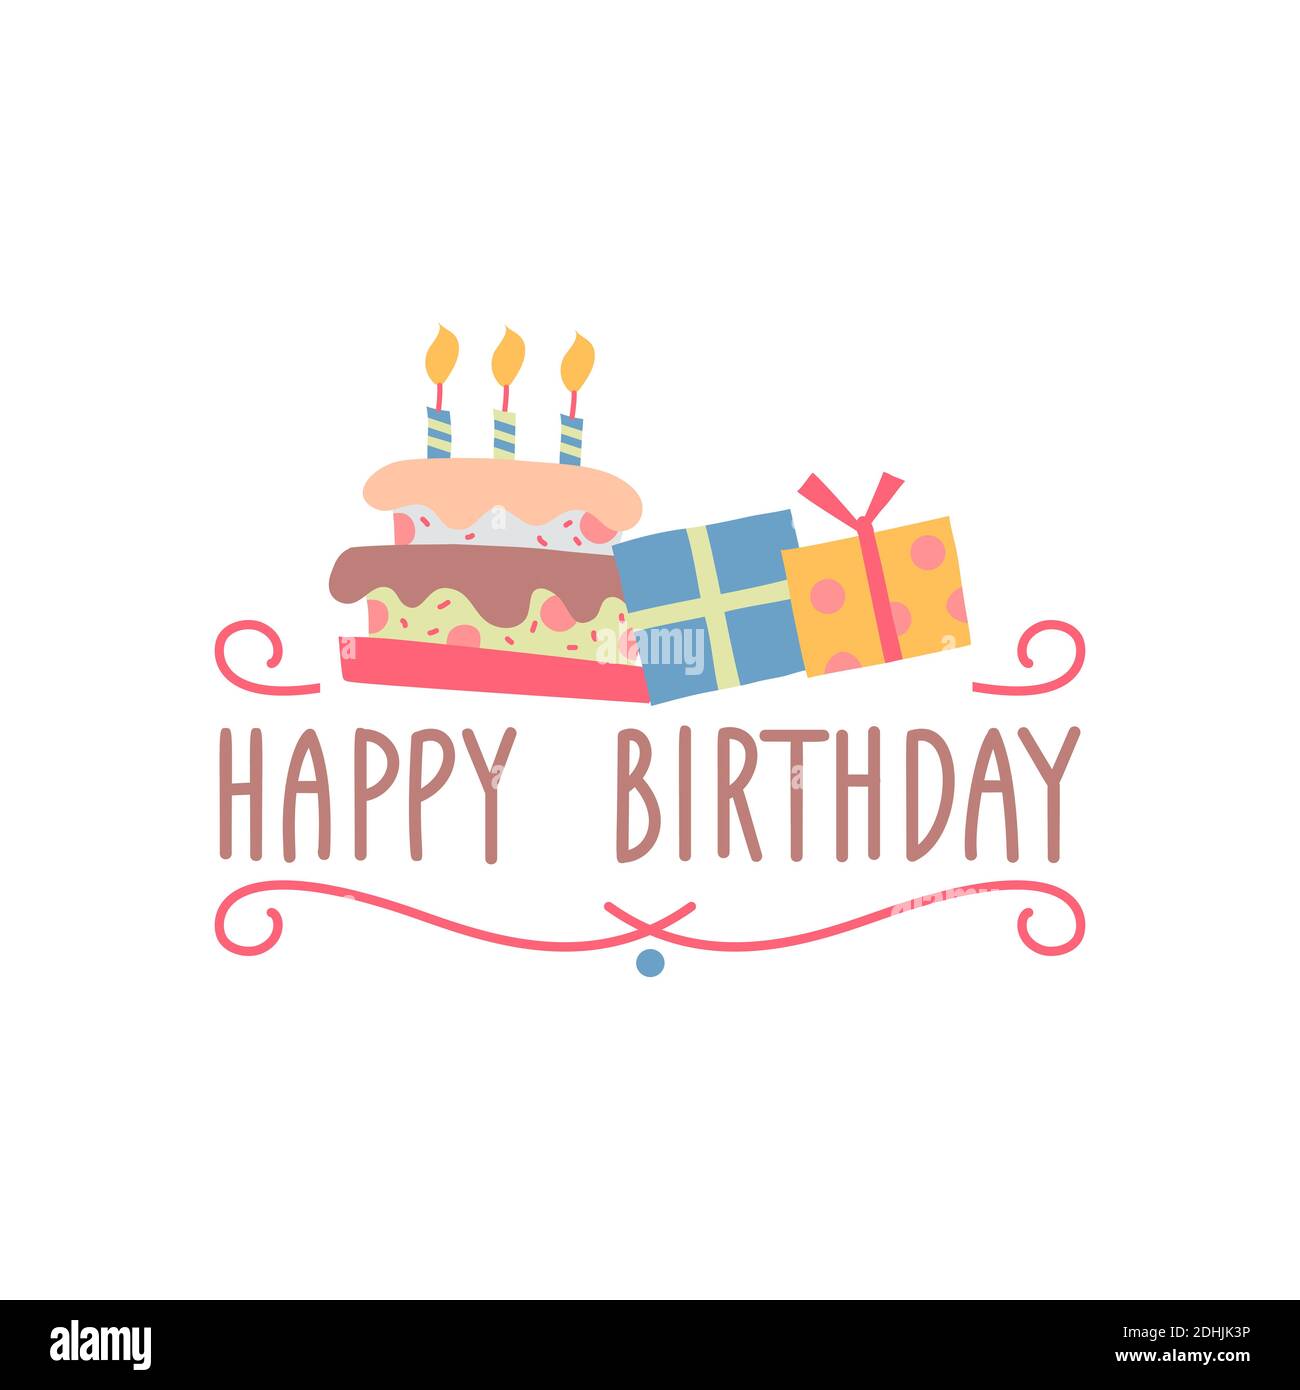 Happy birthday handwritten lettering and colorful party elements Stock Vector